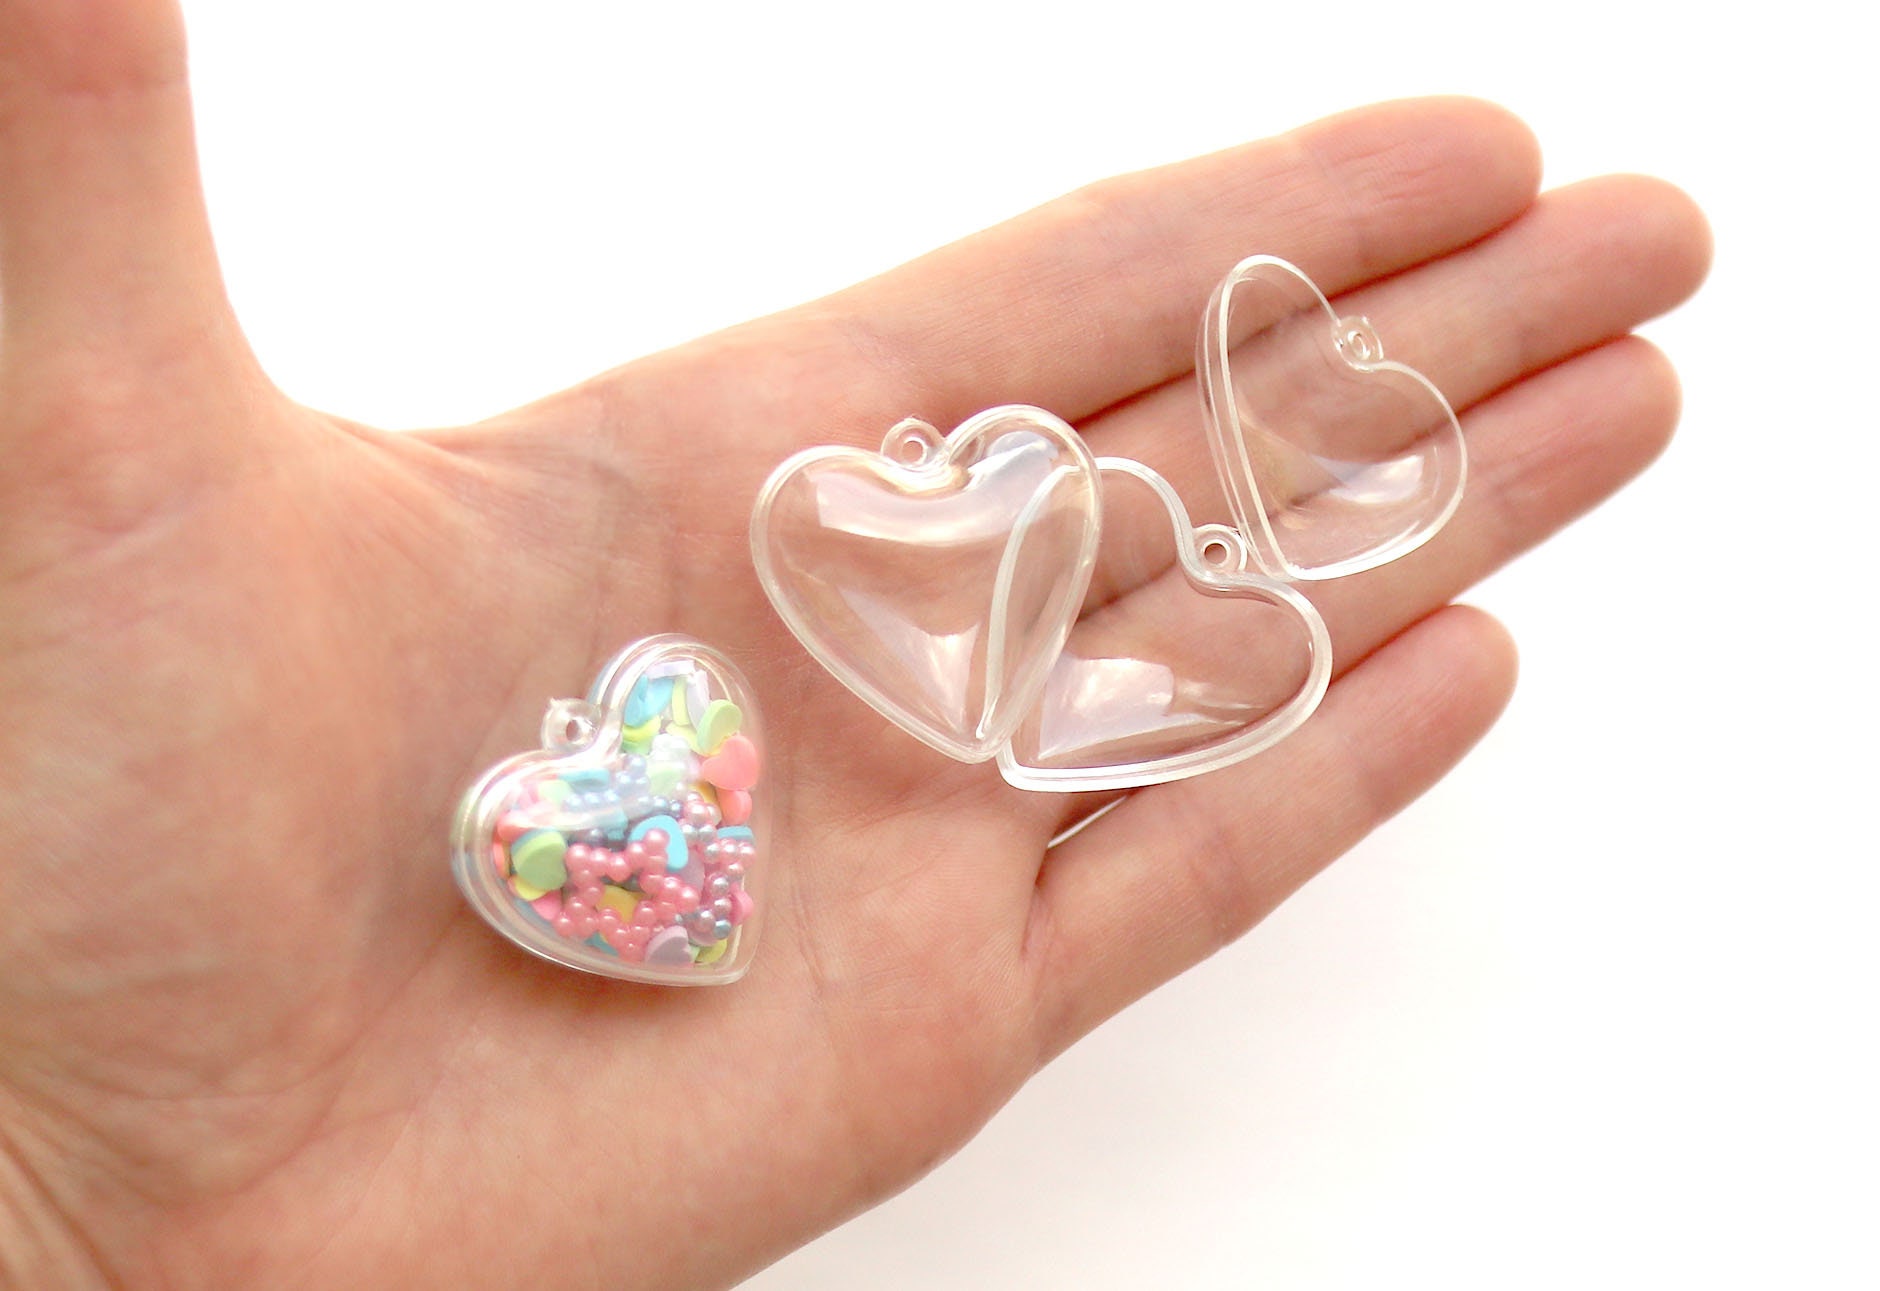 100pcs 10x8mm 2 Colors Mini Heart Charm Cute Heart Charms For Jewelry Making  Small Heart Charm